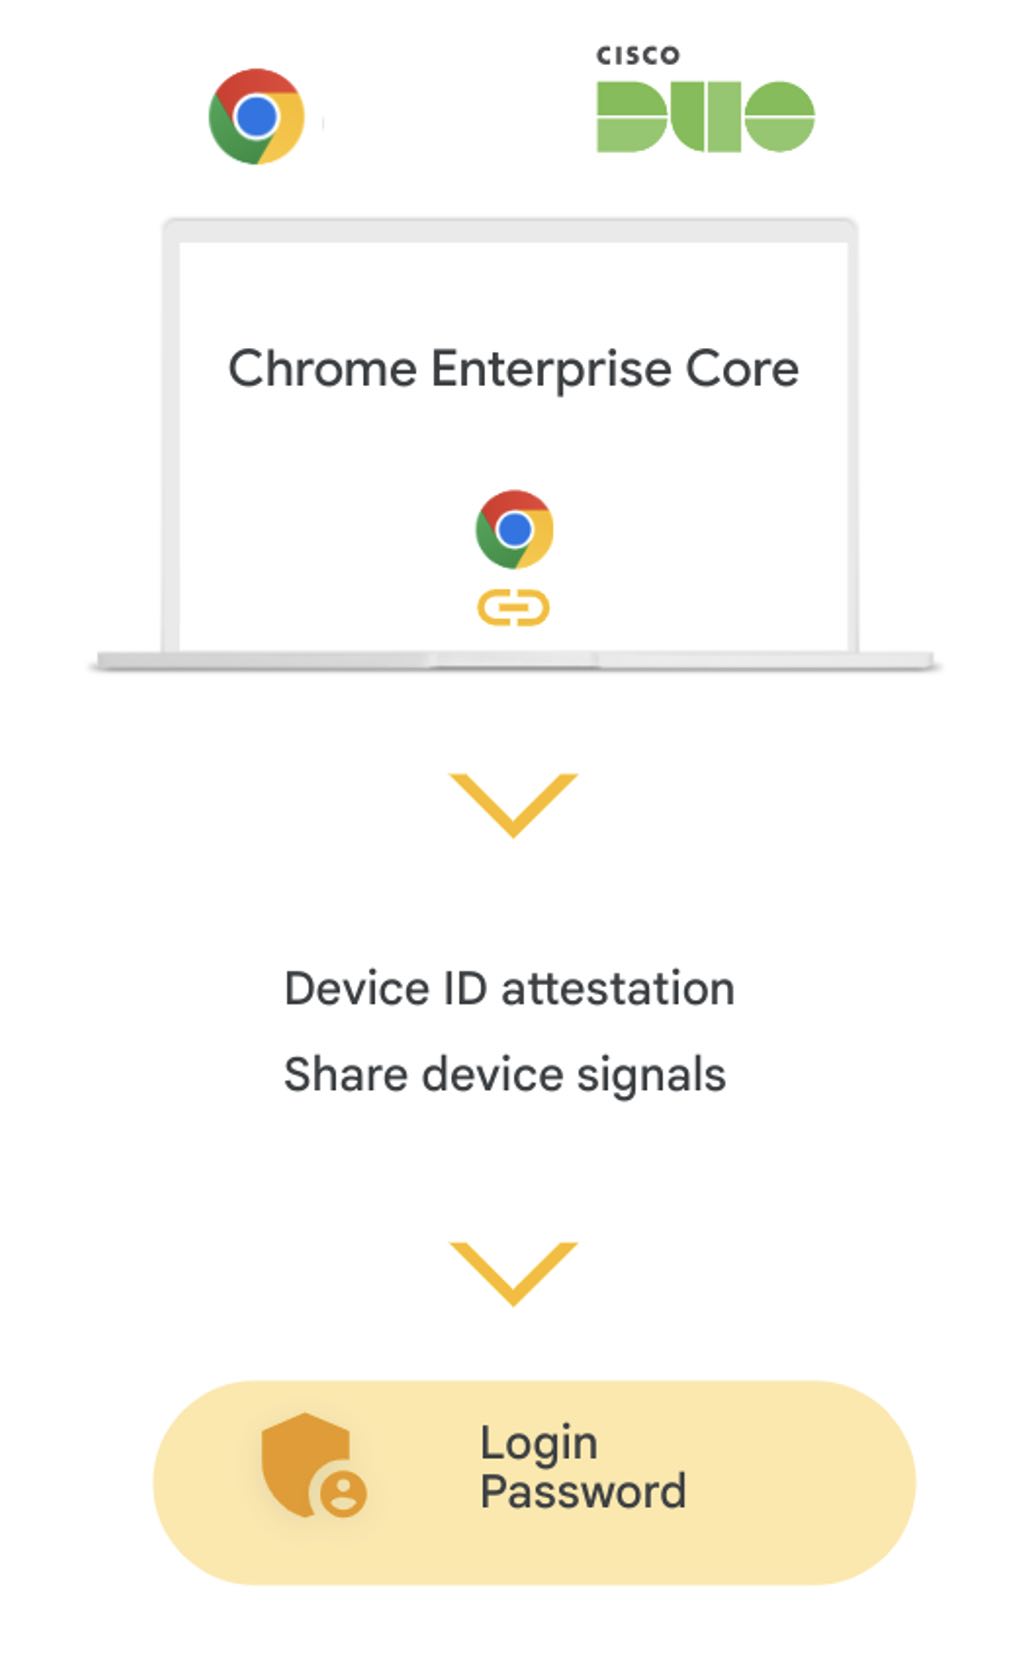 Graphic showing the progression from Chrome Enterprise Core to Device ID attestation and Share device signals to login password